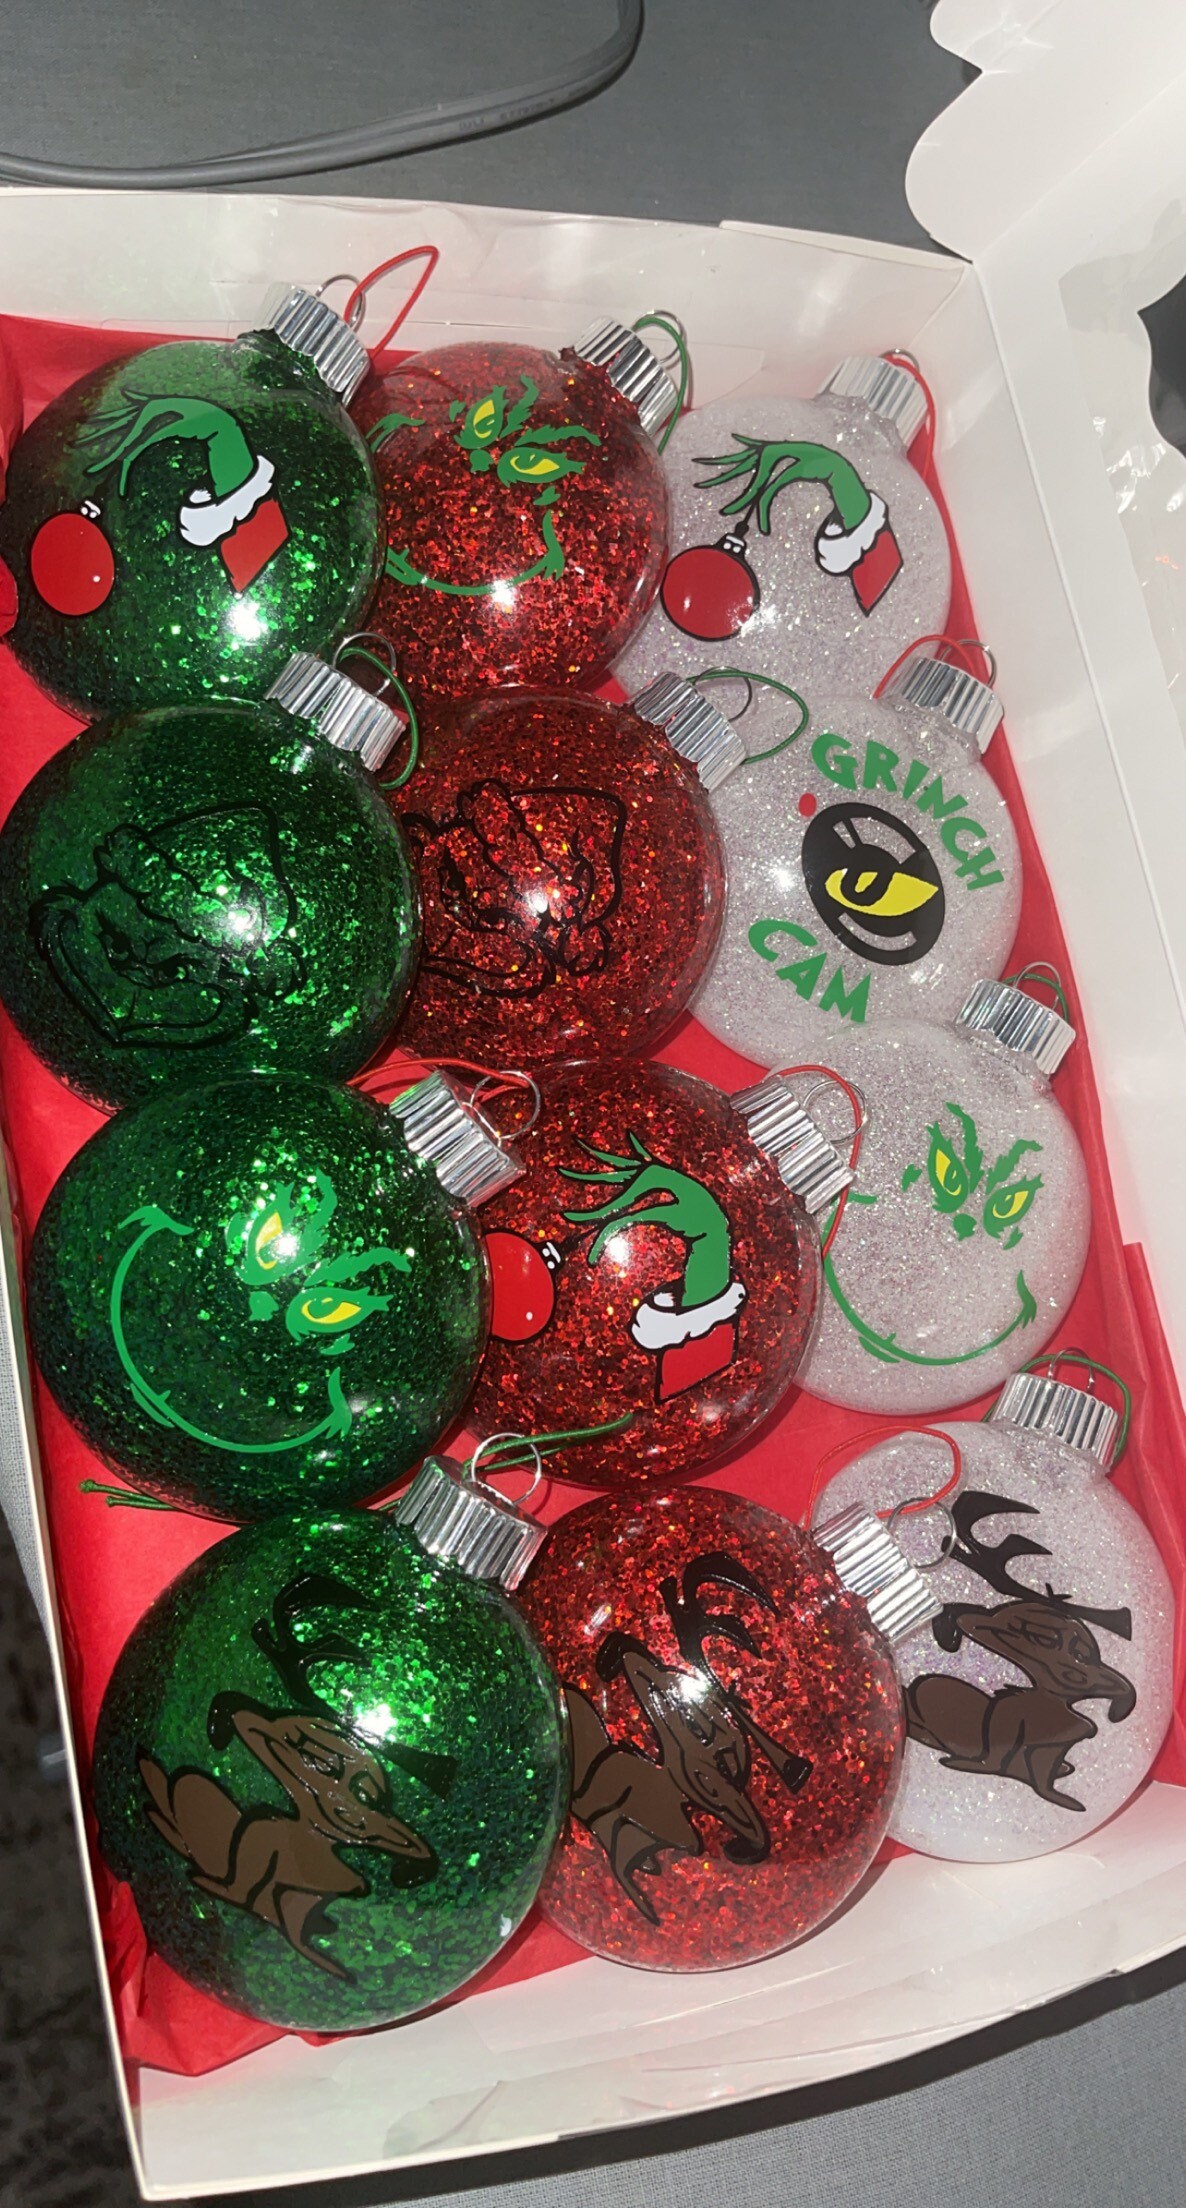 (10) Christmas Grinch Peppermint Red Green Glitter Plastic Ornaments 2.5  Decor